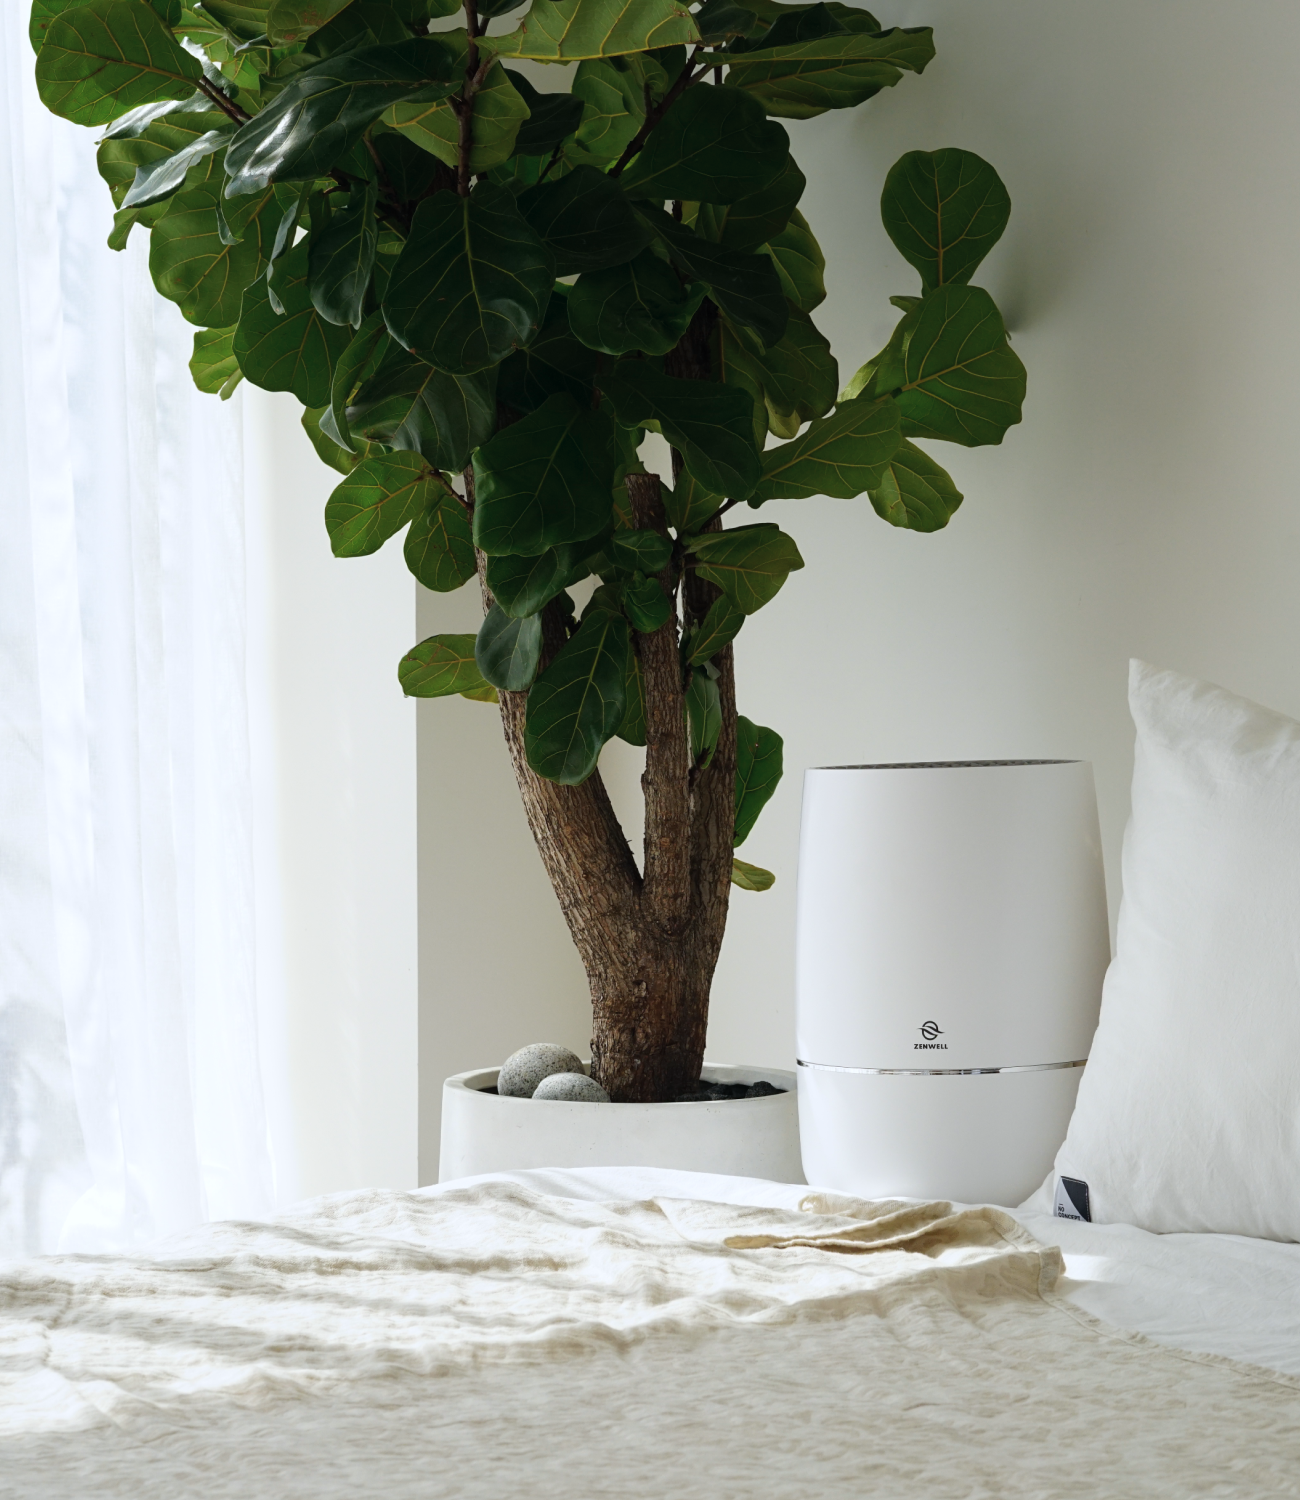 Zenwell Humidifier + Purifier placed in clean bedroom 